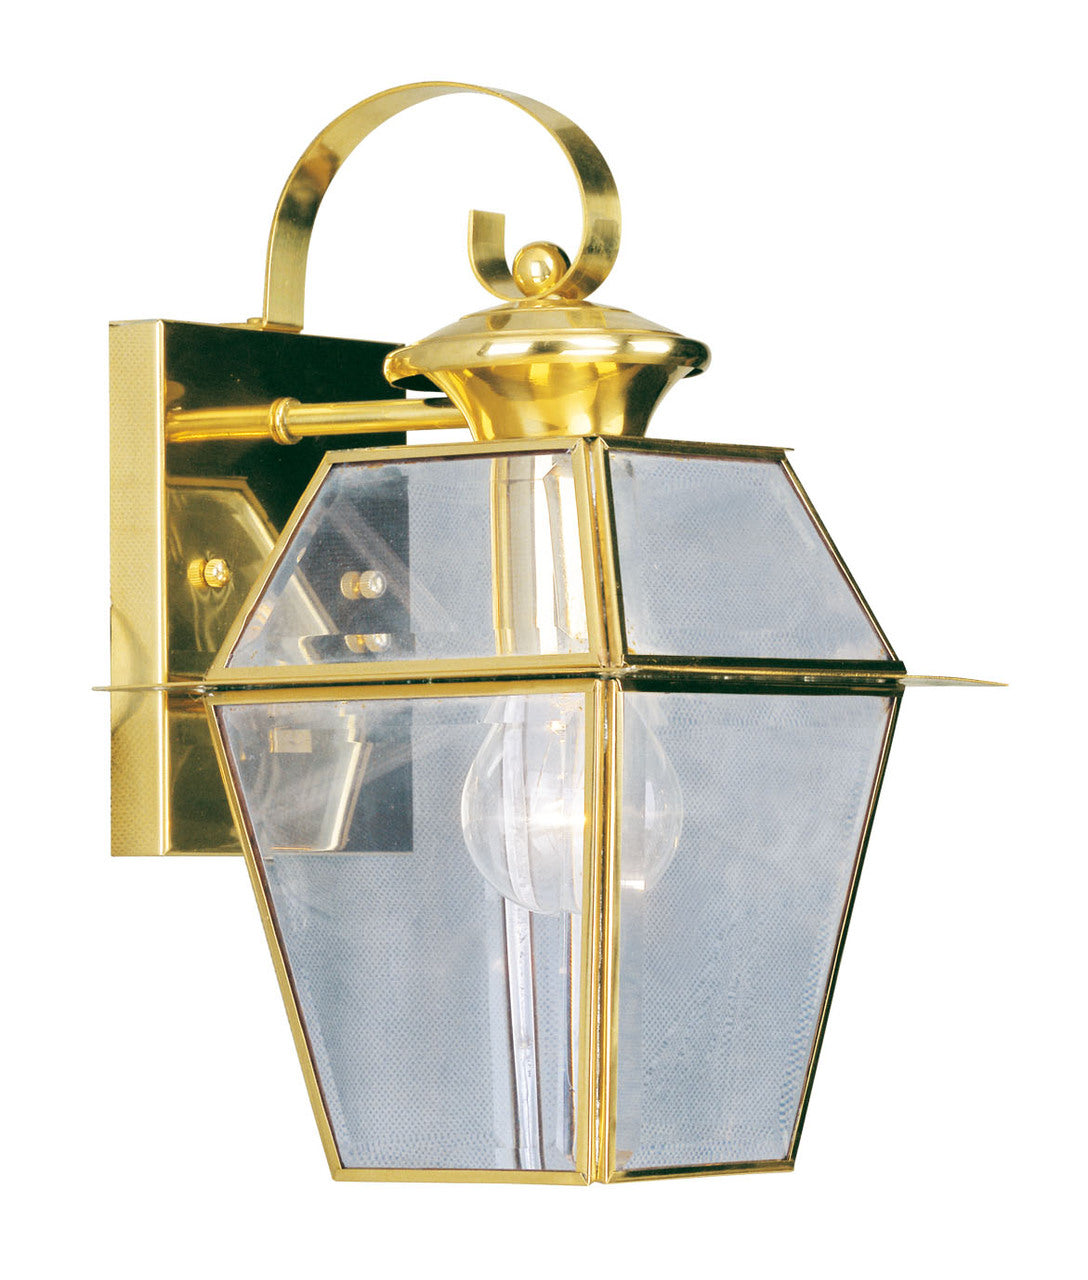 LIVEX Lighting 2181-02 Westover Outdoor Wall Lantern in Polished Brass (1 Light)